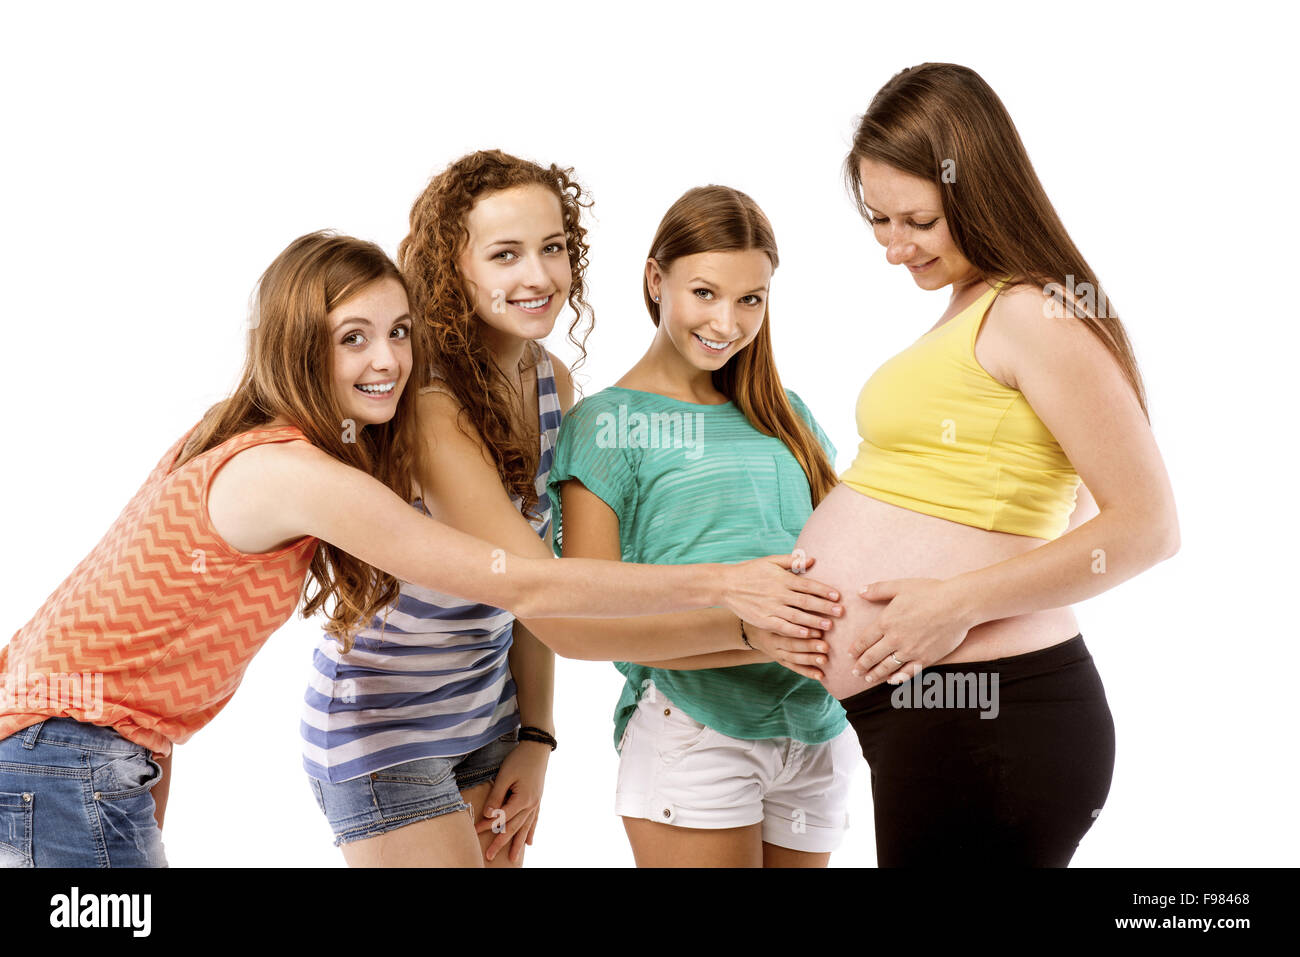 Female friends touching tummy of a pregnant woman, isolated on white background Stock Photo